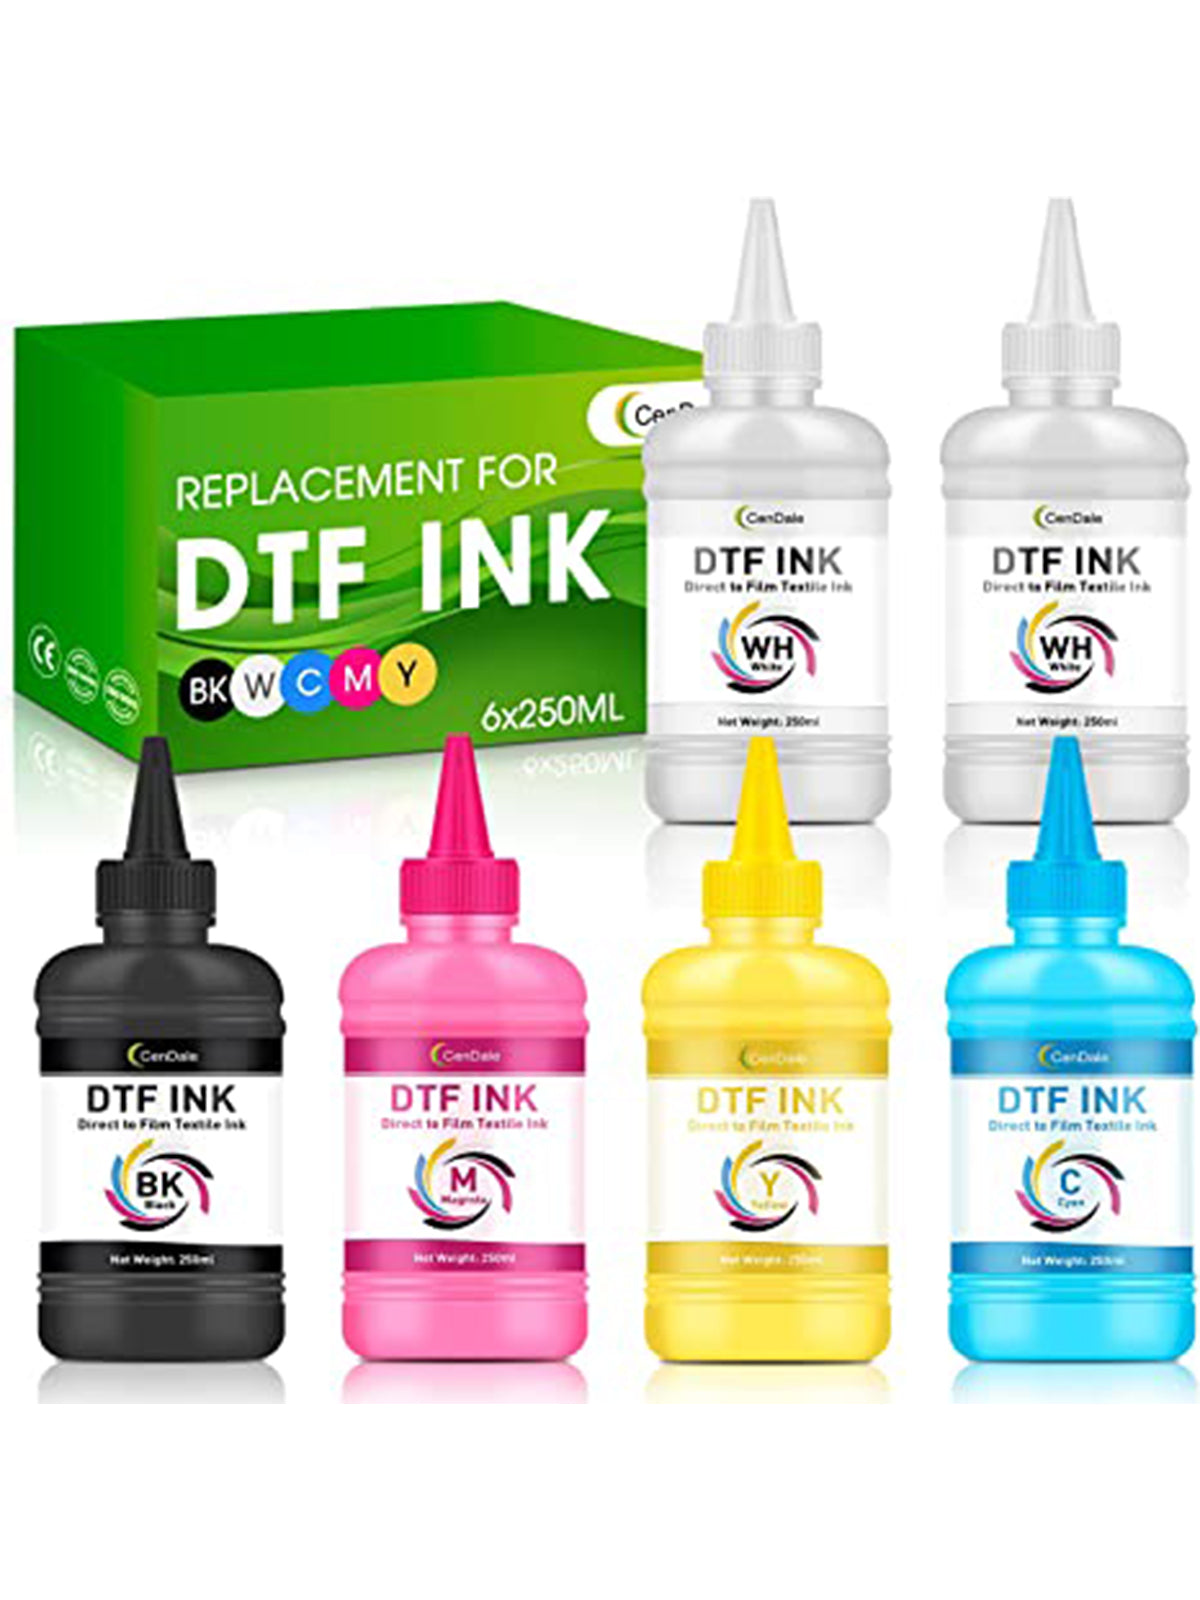 🔥 CenDale DTF Ink is So Fire!! 